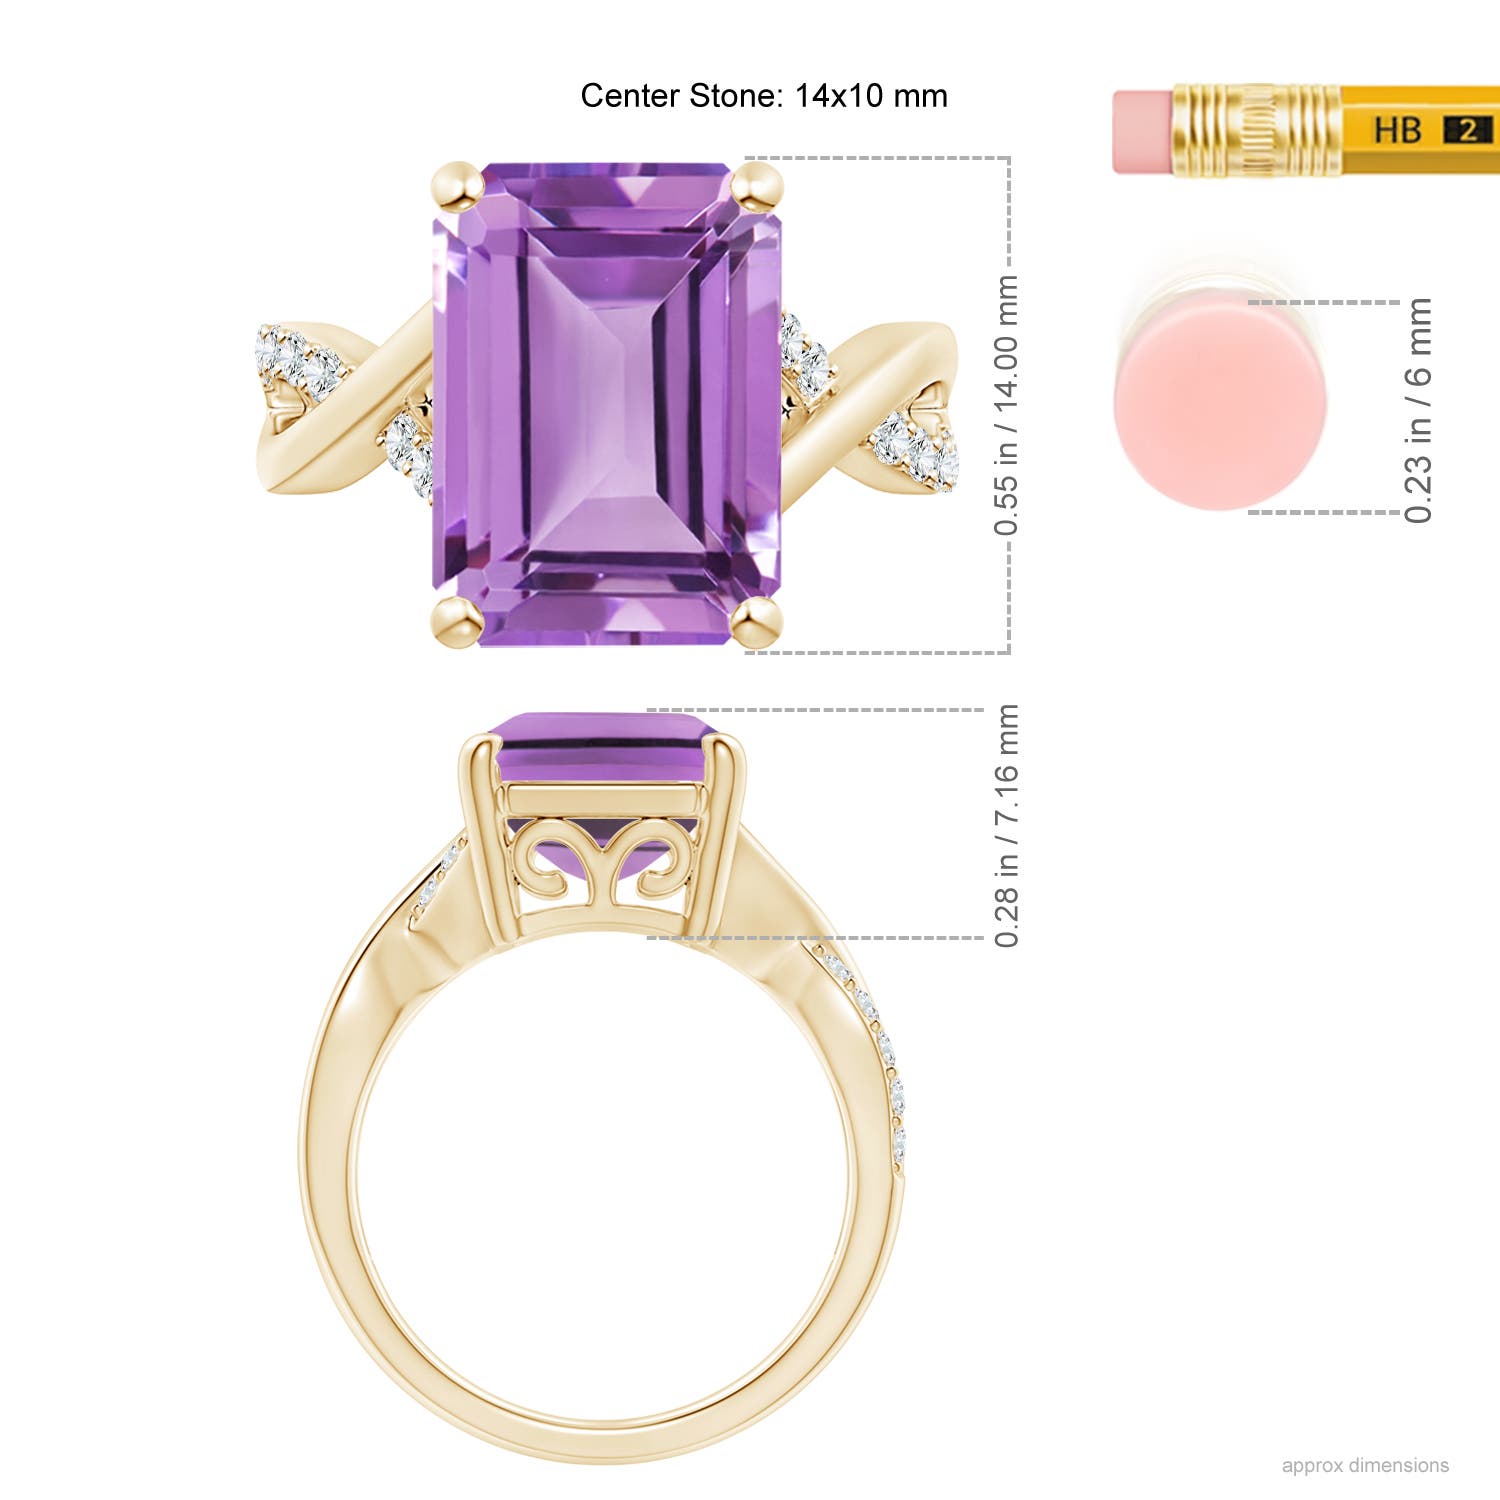 A - Amethyst / 6.7 CT / 14 KT Yellow Gold